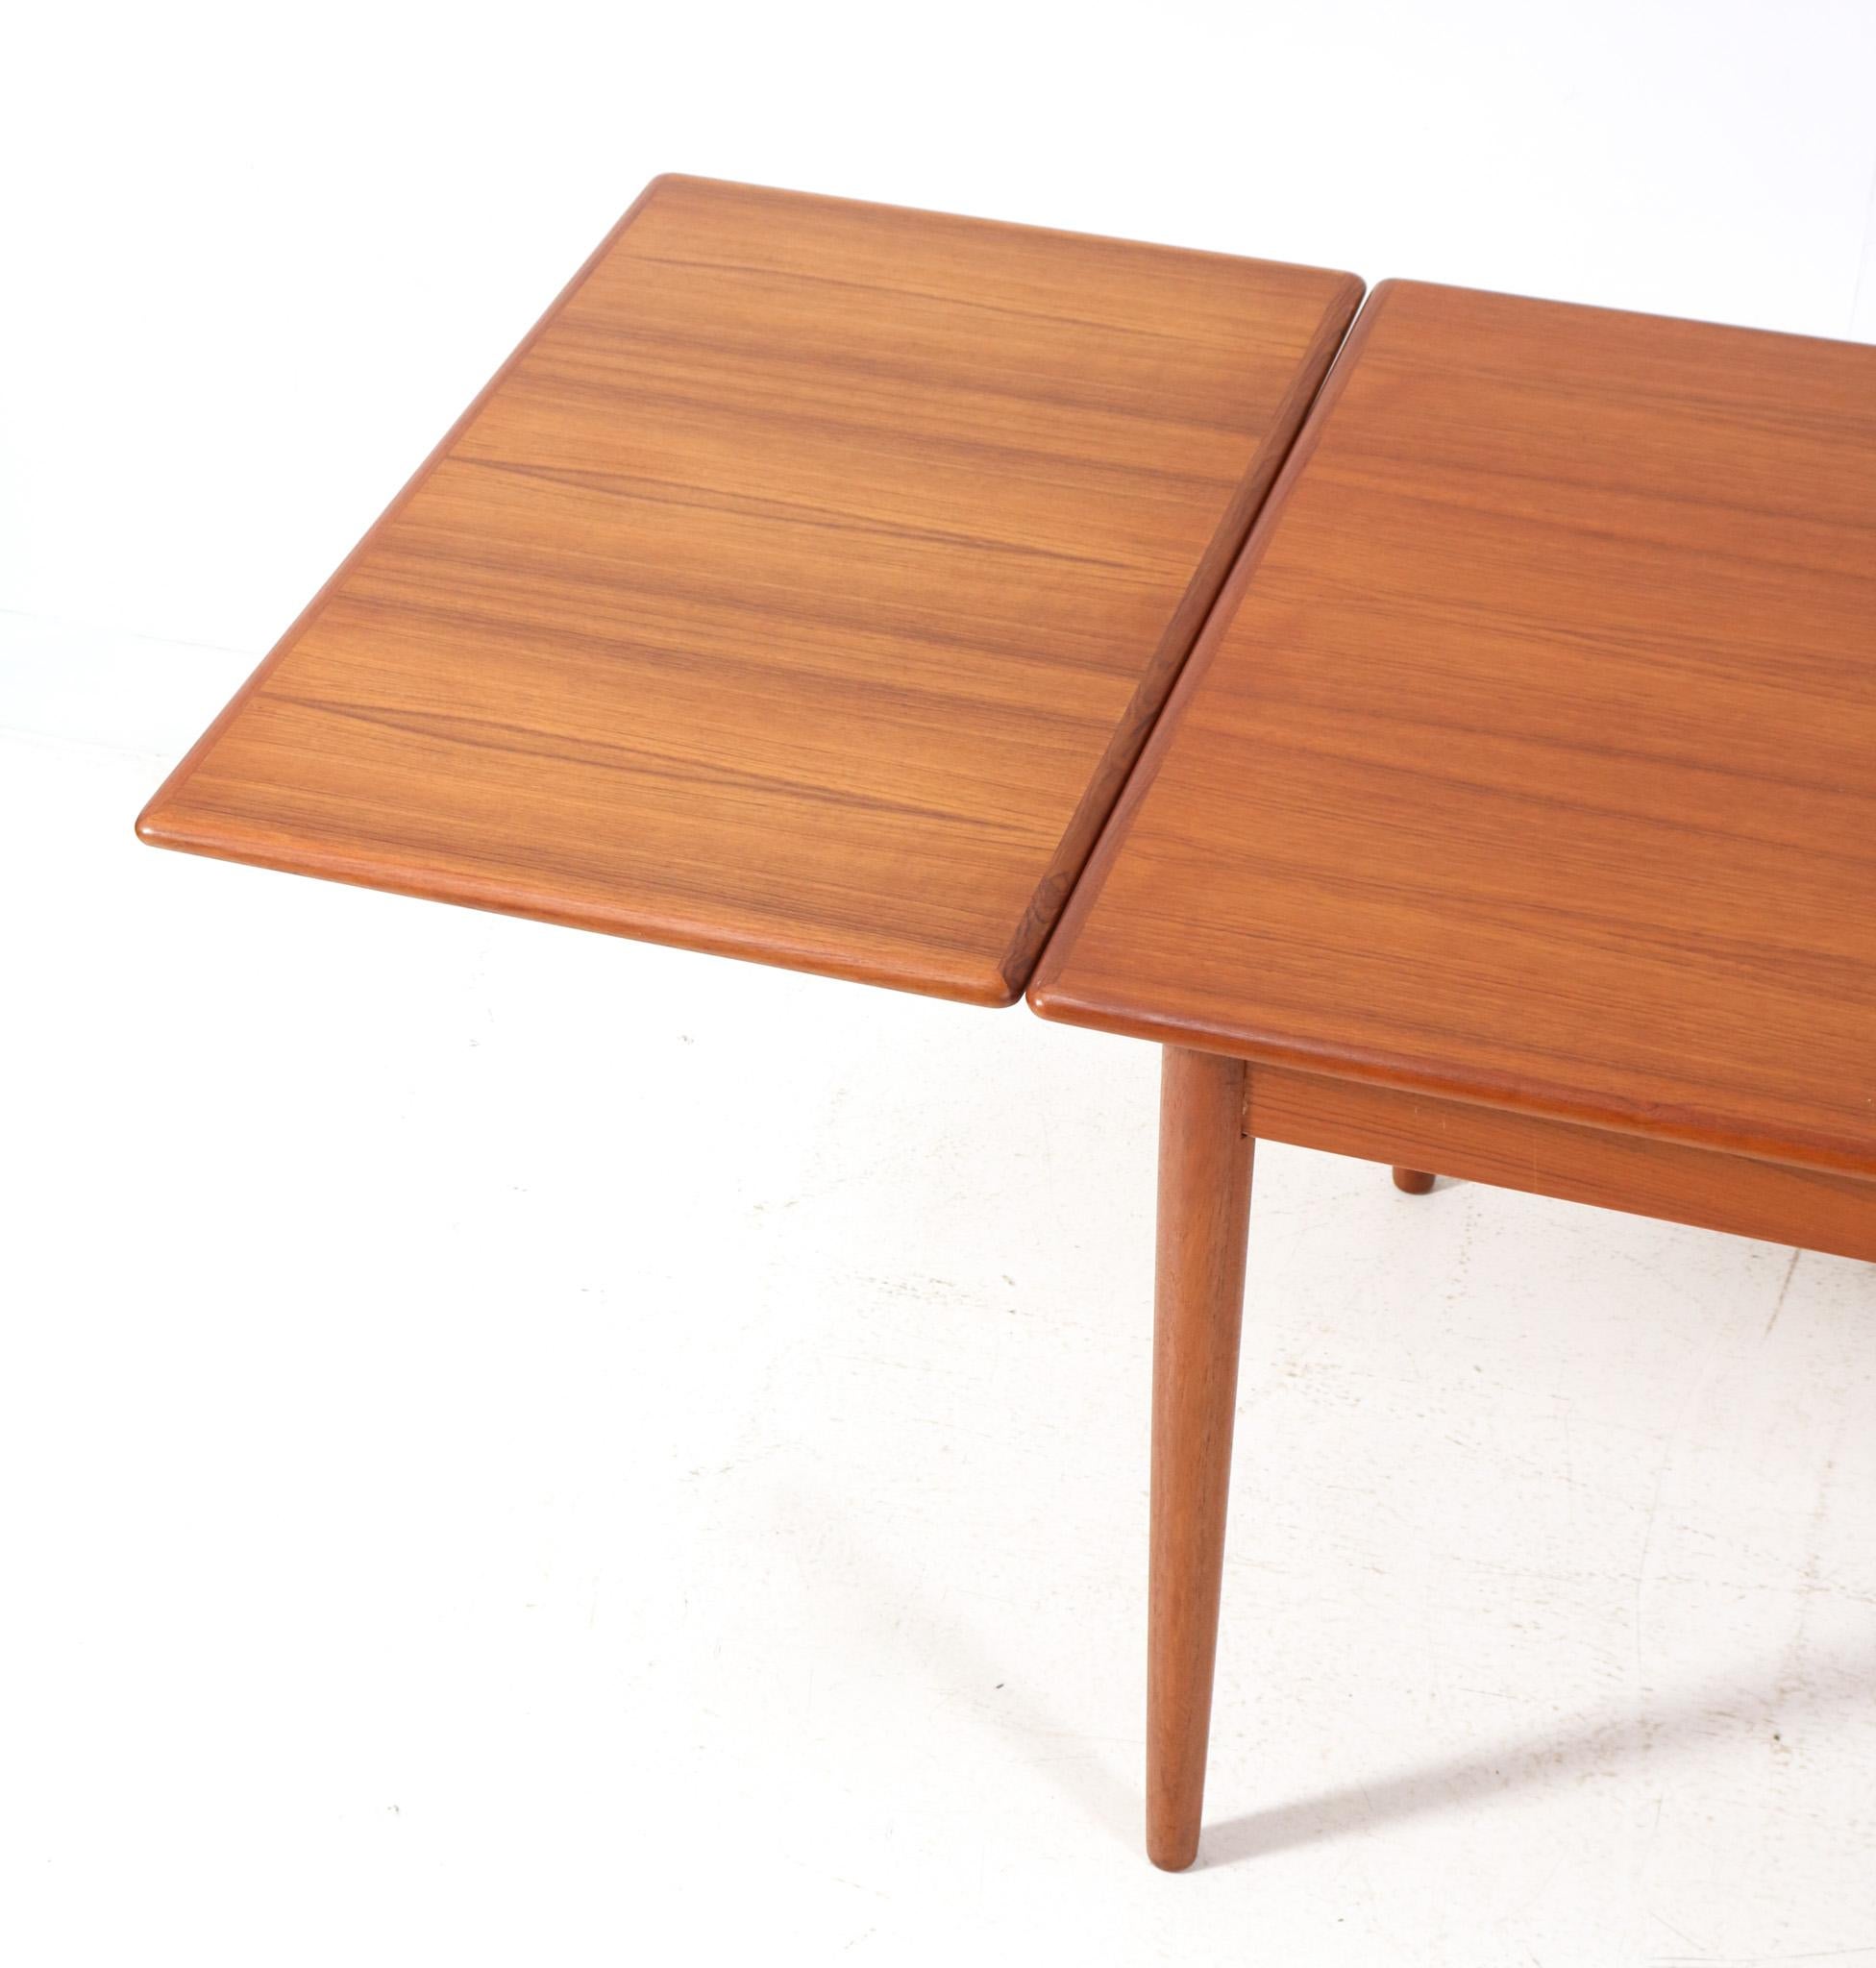 Mid-20th Century Teak Mid-Century Modern Extendable Dining Room Table Mo. 215 by Farstrup, 1960s For Sale